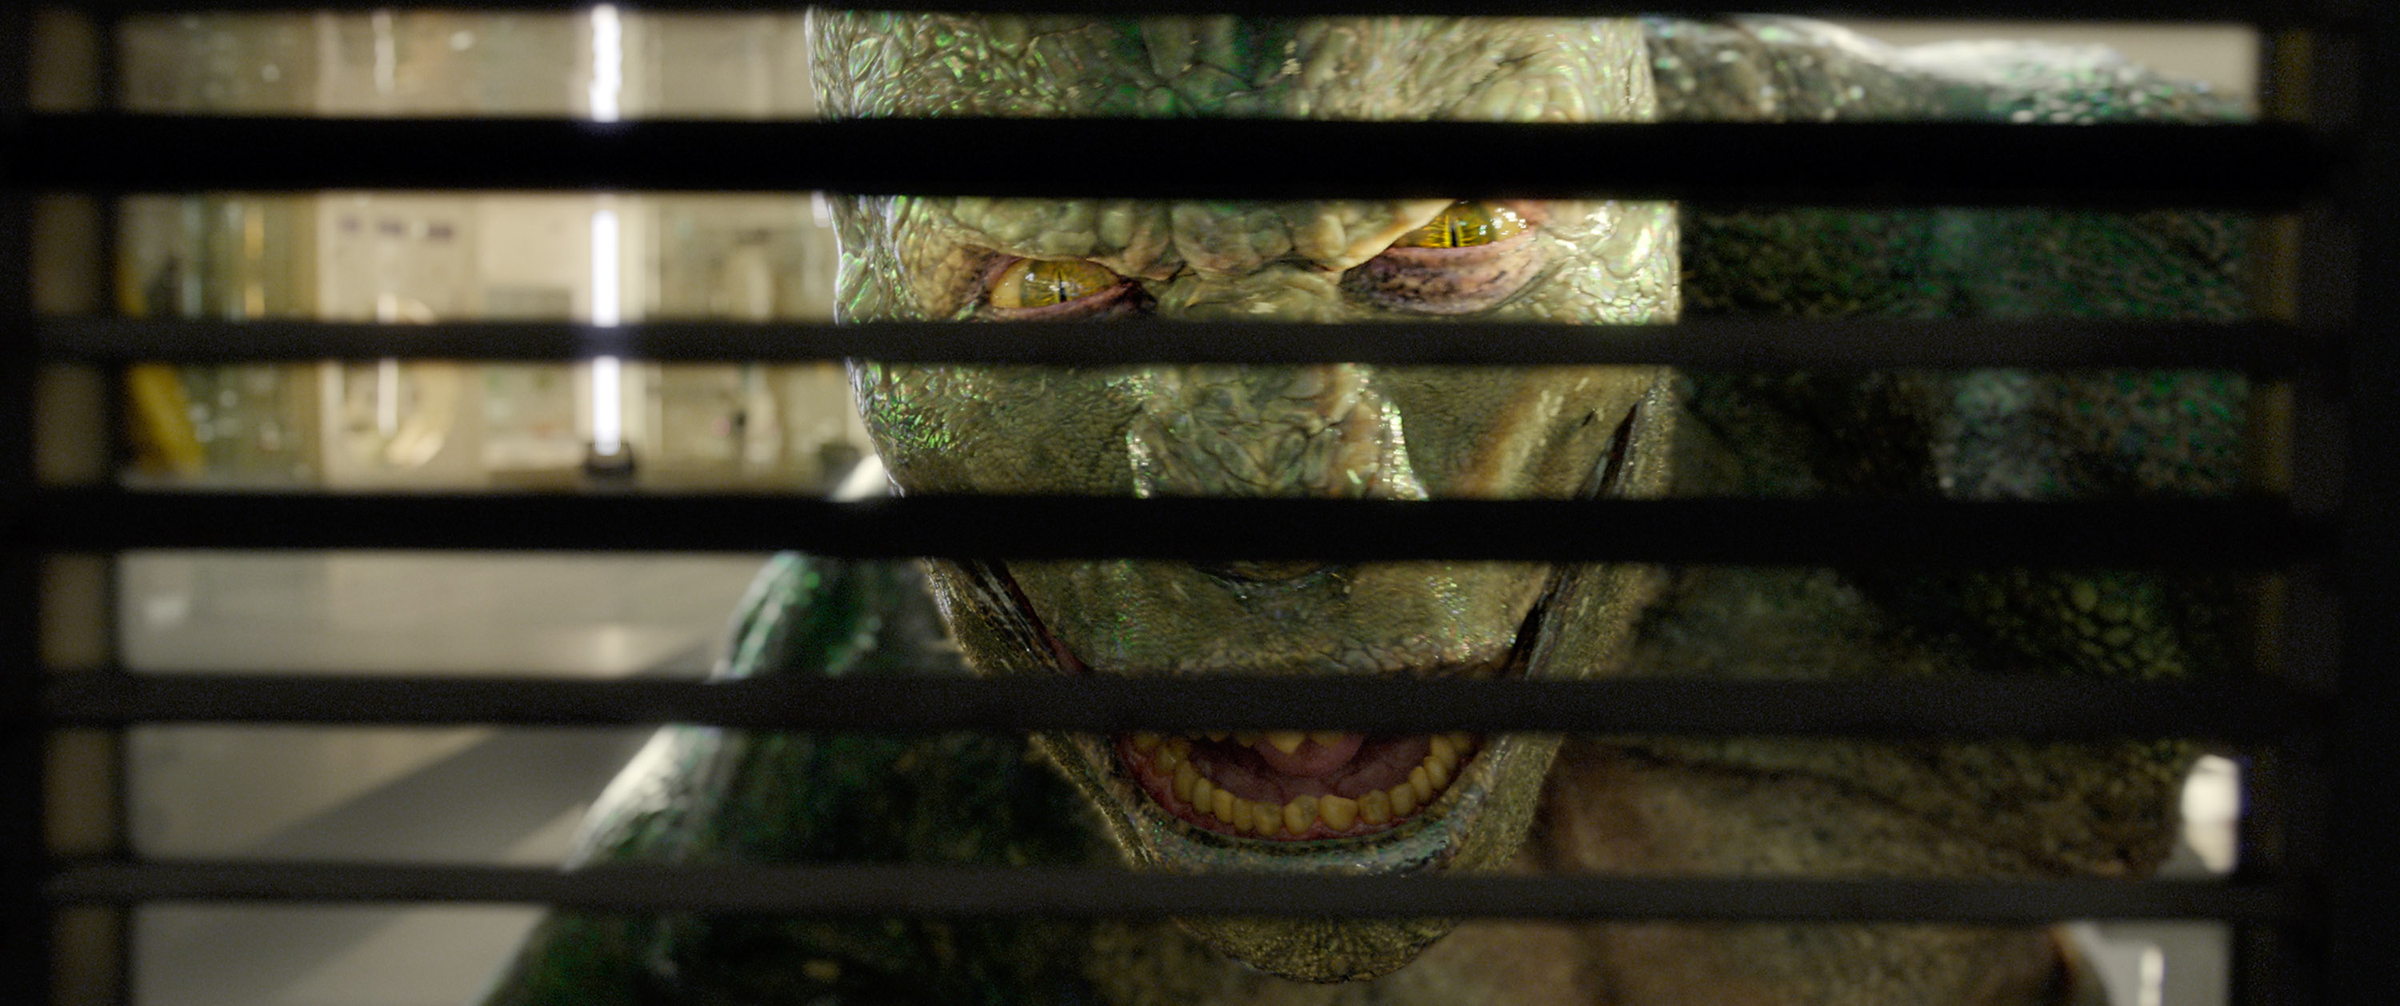 Lizard in <i>The Amazing Spider-Man</i> (Columbia Pictures—Everett Collection)